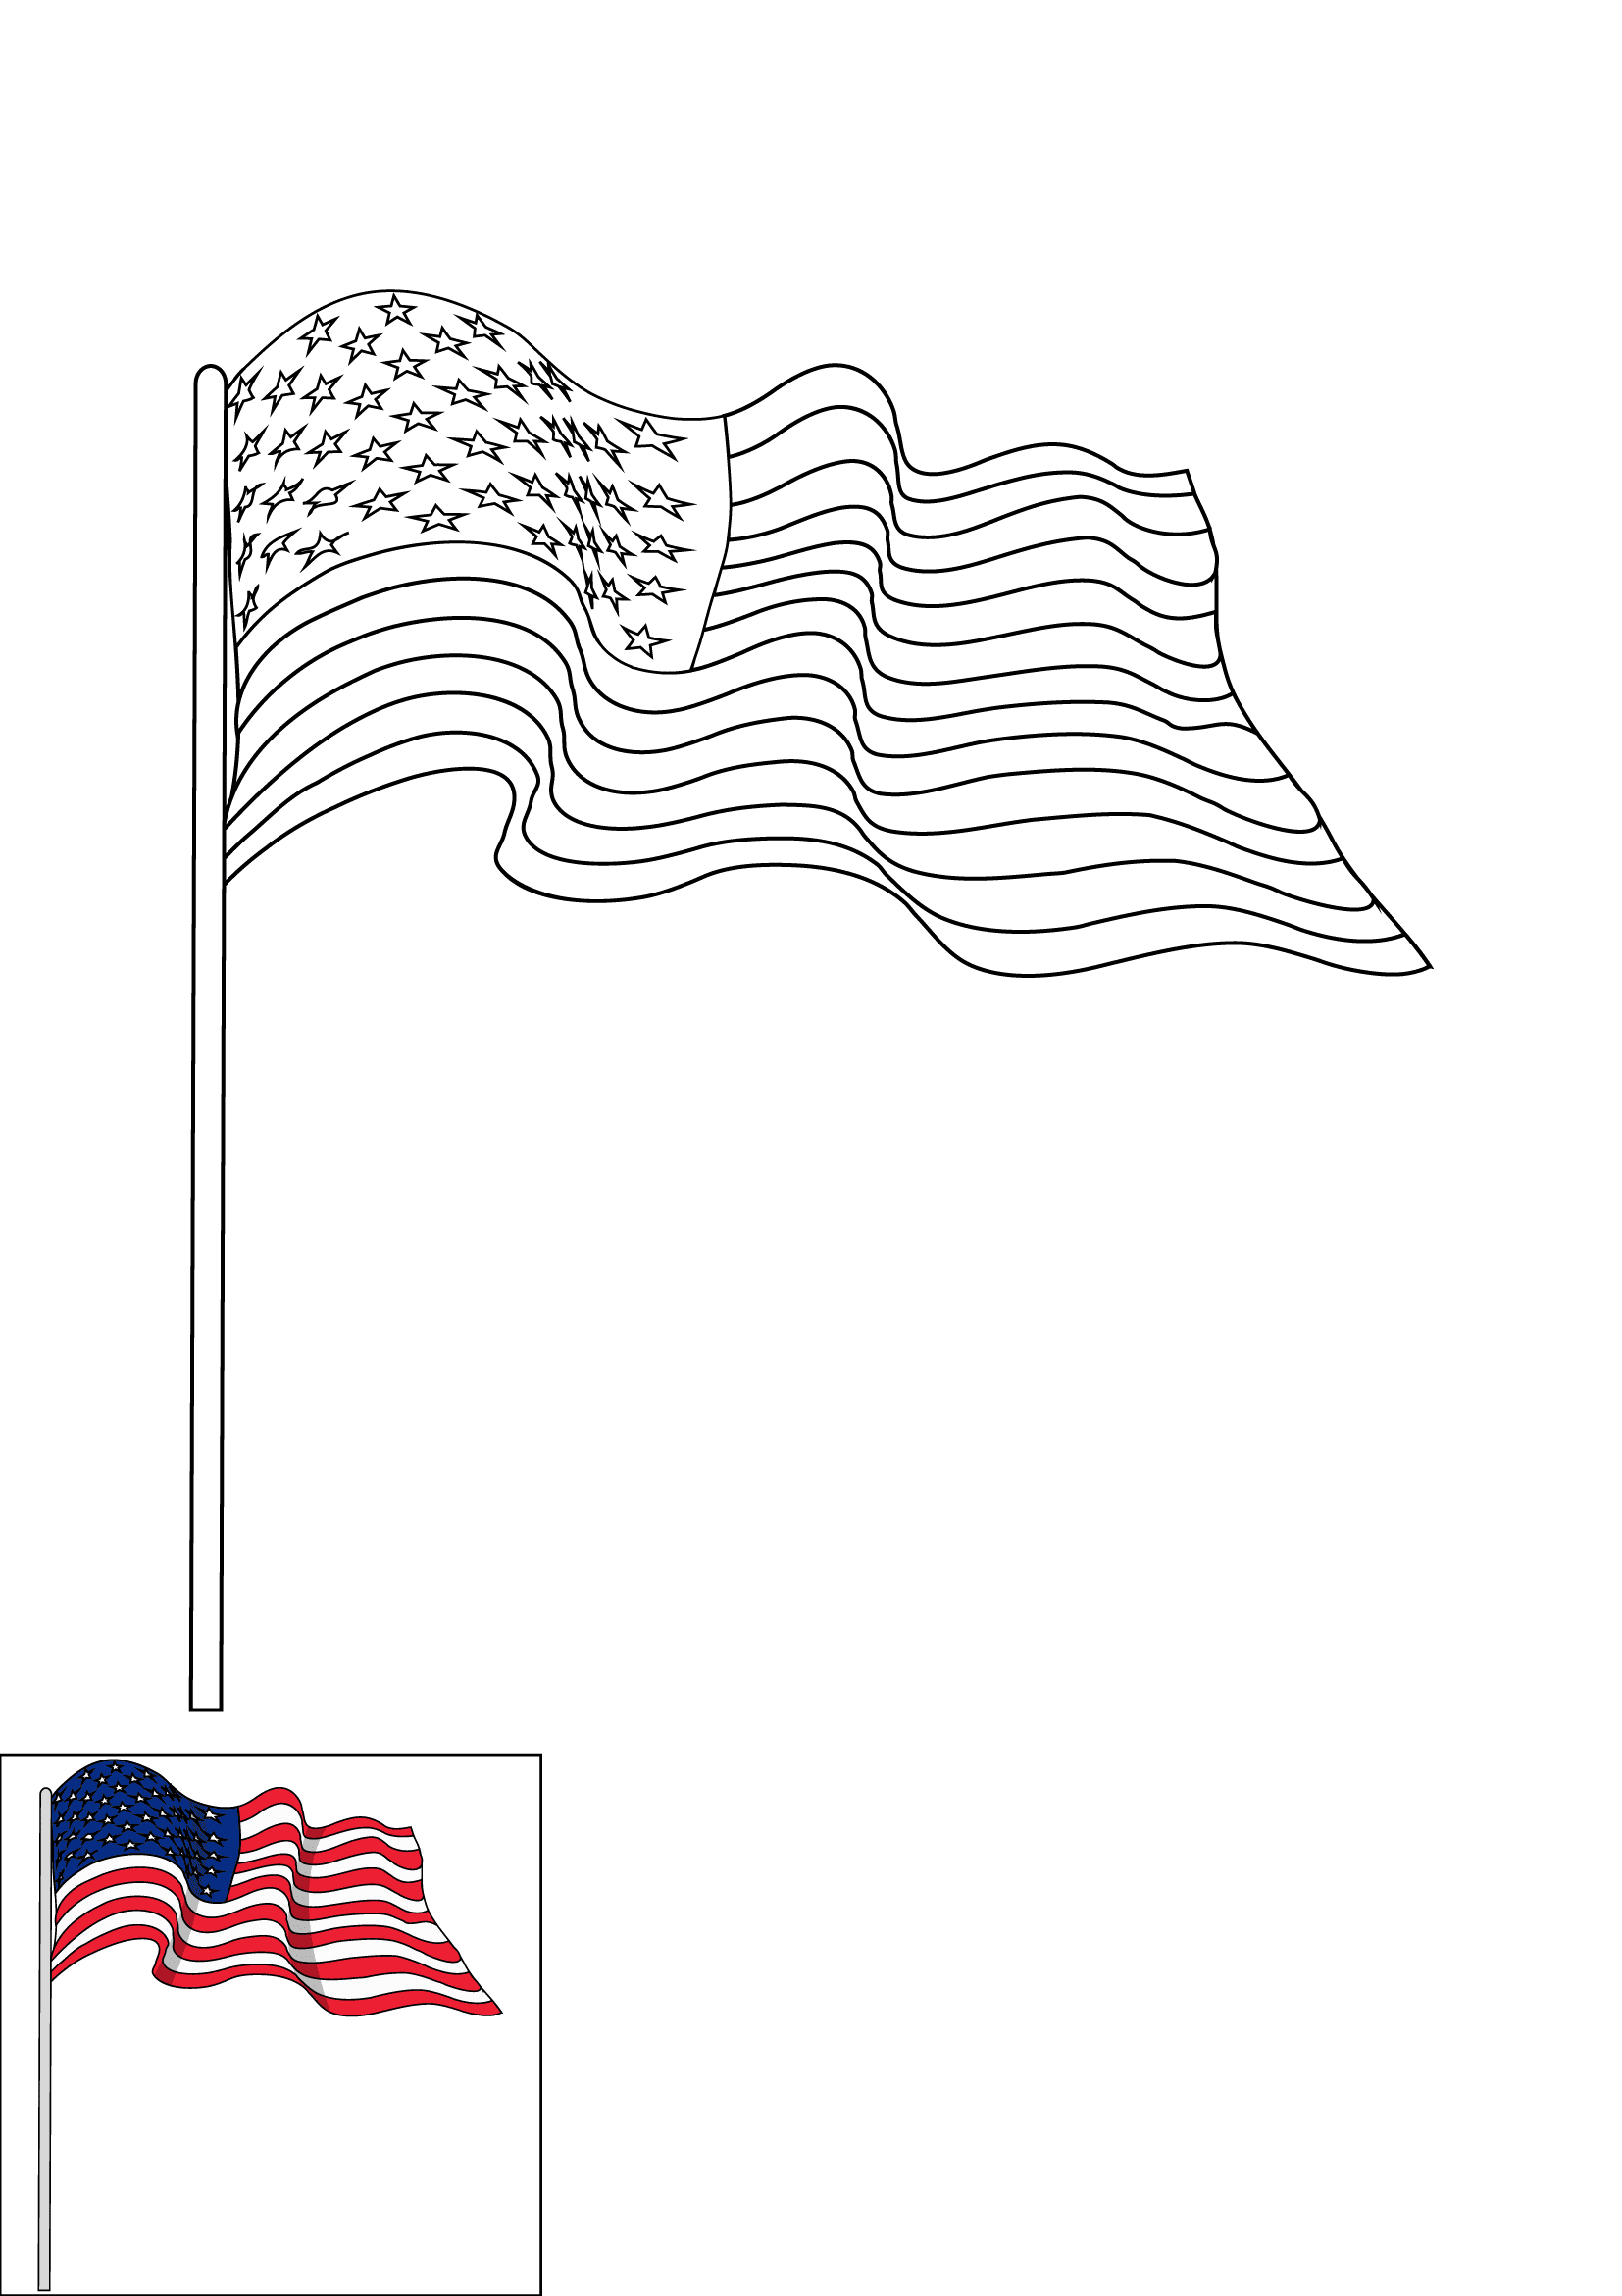 How To Draw The American Flag Step By Step